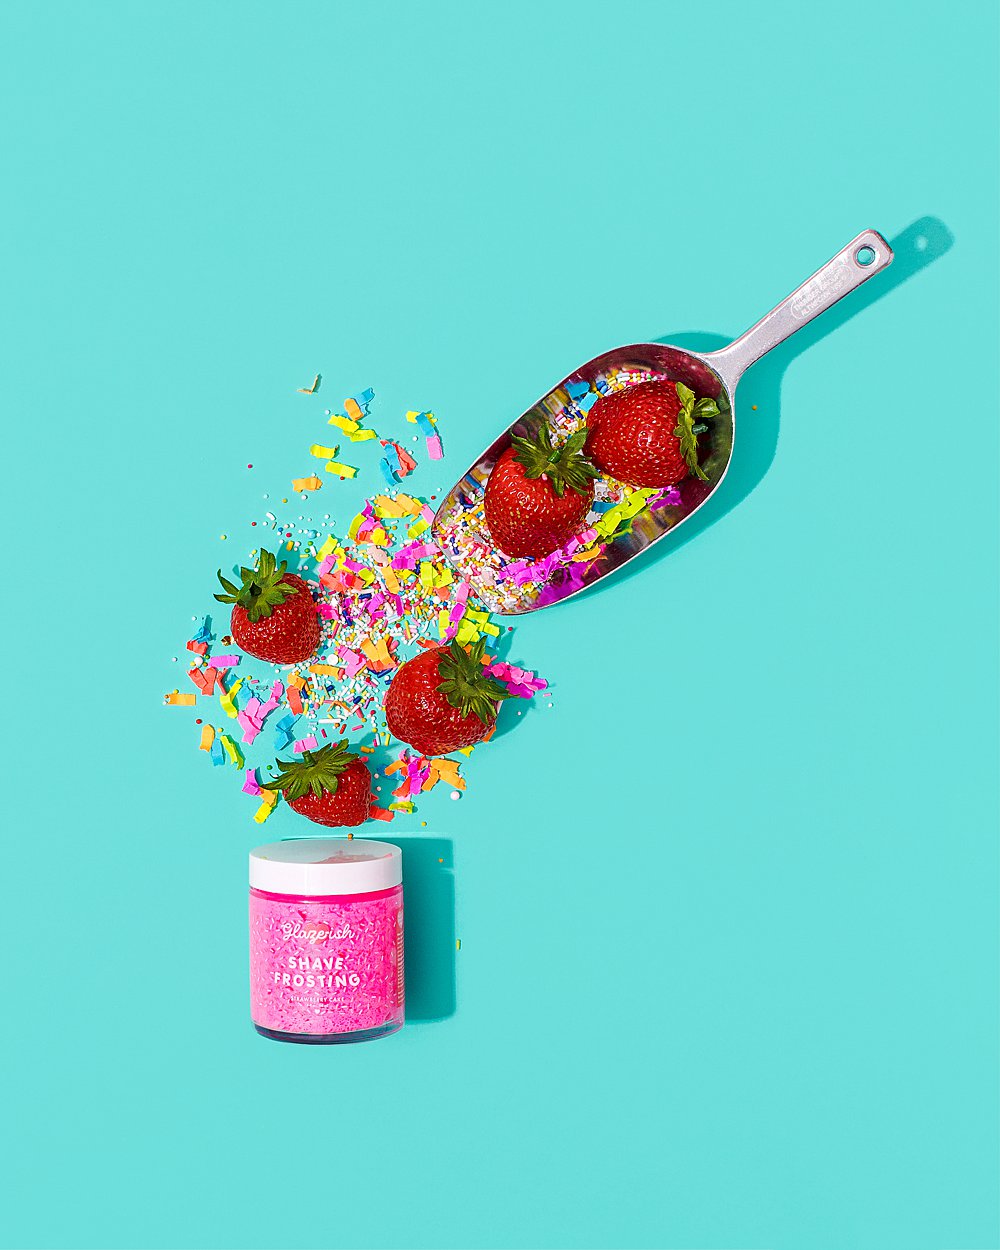 Brightly coloured beauty product content creation for Glaze-ish. Styled product stills photography by HIYA MARIANNE.